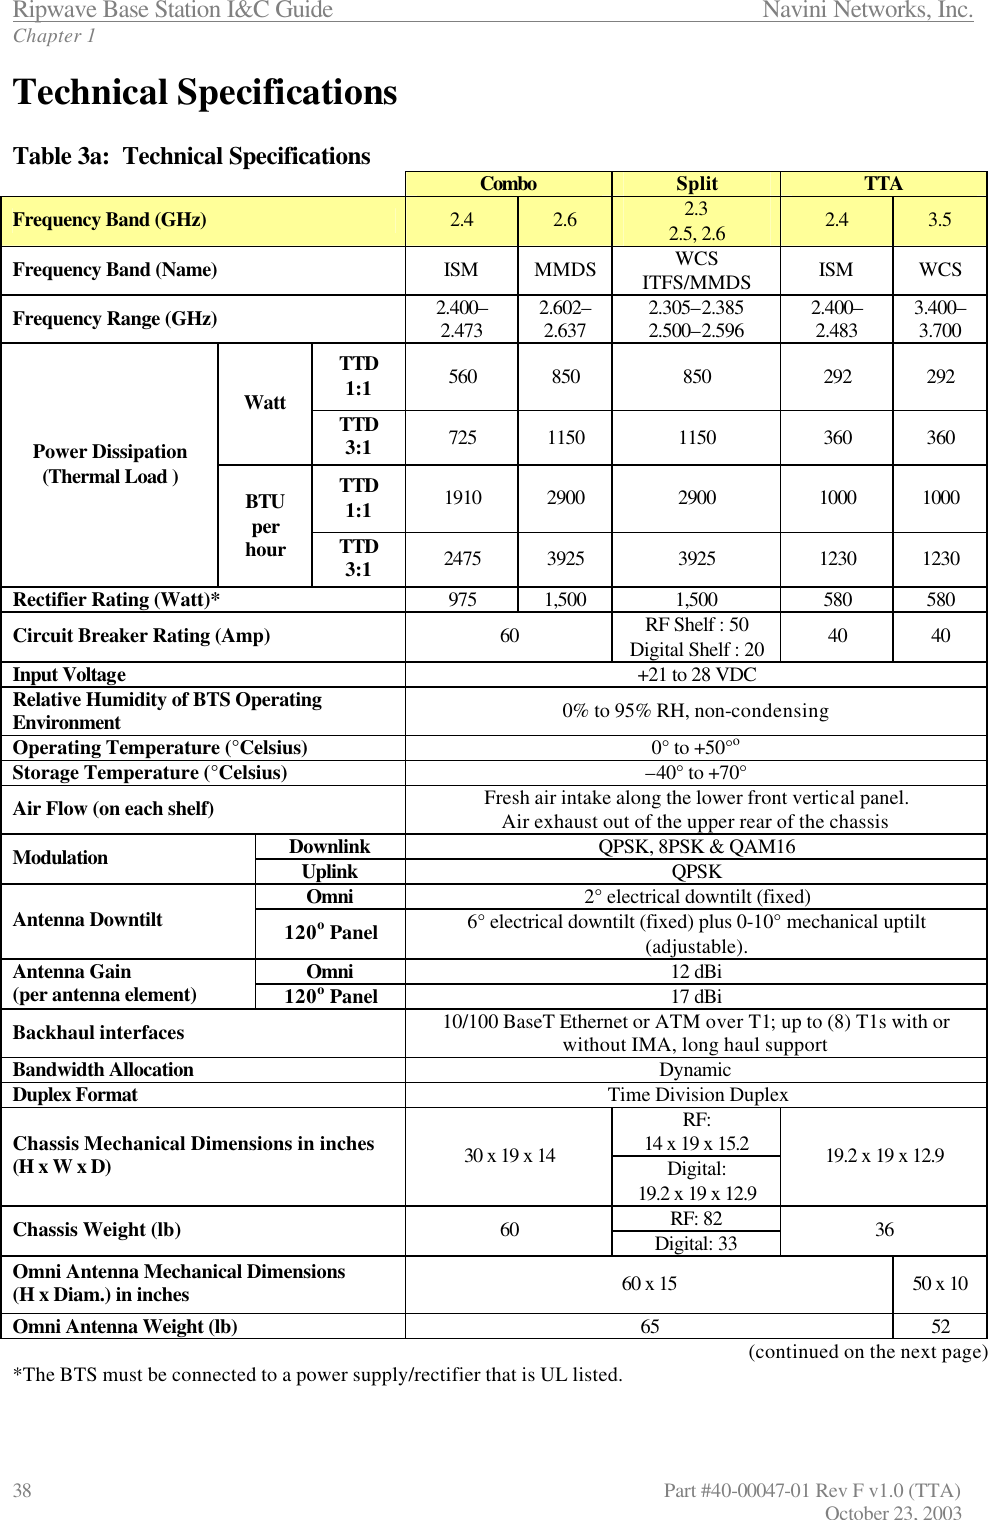 Ripwave Base Station I&amp;C Guide                 Navini Networks, Inc. Chapter 1 38                   Part #40-00047-01 Rev F v1.0 (TTA)                                       October 23, 2003 Technical Specifications  Table 3a:  Technical Specifications  Combo Split TTA Frequency Band (GHz) 2.4 2.6 2.3 2.5, 2.6 2.4 3.5 Frequency Band (Name) ISM MMDS WCS ITFS/MMDS ISM WCS Frequency Range (GHz) 2.400–2.473 2.602–2.637 2.305–2.385 2.500–2.596 2.400–2.483 3.400–3.700 TTD 1:1 560 850 850 292 292 Watt TTD 3:1 725 1150 1150 360 360 TTD 1:1 1910 2900 2900 1000 1000 Power Dissipation (Thermal Load ) BTU per hour TTD 3:1 2475 3925 3925 1230 1230 Rectifier Rating (Watt)* 975 1,500 1,500 580 580 Circuit Breaker Rating (Amp) 60 RF Shelf : 50 Digital Shelf : 20 40 40 Input Voltage +21 to 28 VDC Relative Humidity of BTS Operating Environment 0% to 95% RH, non-condensing Operating Temperature (°Celsius) 0° to +50°o Storage Temperature (°Celsius) –40° to +70° Air Flow (on each shelf) Fresh air intake along the lower front vertical panel. Air exhaust out of the upper rear of the chassis  Downlink QPSK, 8PSK &amp; QAM16 Modulation Uplink QPSK Omni 2° electrical downtilt (fixed) Antenna Downtilt 120o Panel 6° electrical downtilt (fixed) plus 0-10° mechanical uptilt (adjustable). Omni 12 dBi Antenna Gain (per antenna element) 120o Panel 17 dBi Backhaul interfaces 10/100 BaseT Ethernet or ATM over T1; up to (8) T1s with or without IMA, long haul support Bandwidth Allocation Dynamic Duplex Format Time Division Duplex RF: 14 x 19 x 15.2 Chassis Mechanical Dimensions in inches (H x W x D) 30 x 19 x 14 Digital: 19.2 x 19 x 12.9 19.2 x 19 x 12.9 RF: 82 Chassis Weight (lb) 60 Digital: 33 36 Omni Antenna Mechanical Dimensions (H x Diam.) in inches 60 x 15 50 x 10 Omni Antenna Weight (lb) 65 52 (continued on the next page) *The BTS must be connected to a power supply/rectifier that is UL listed.   